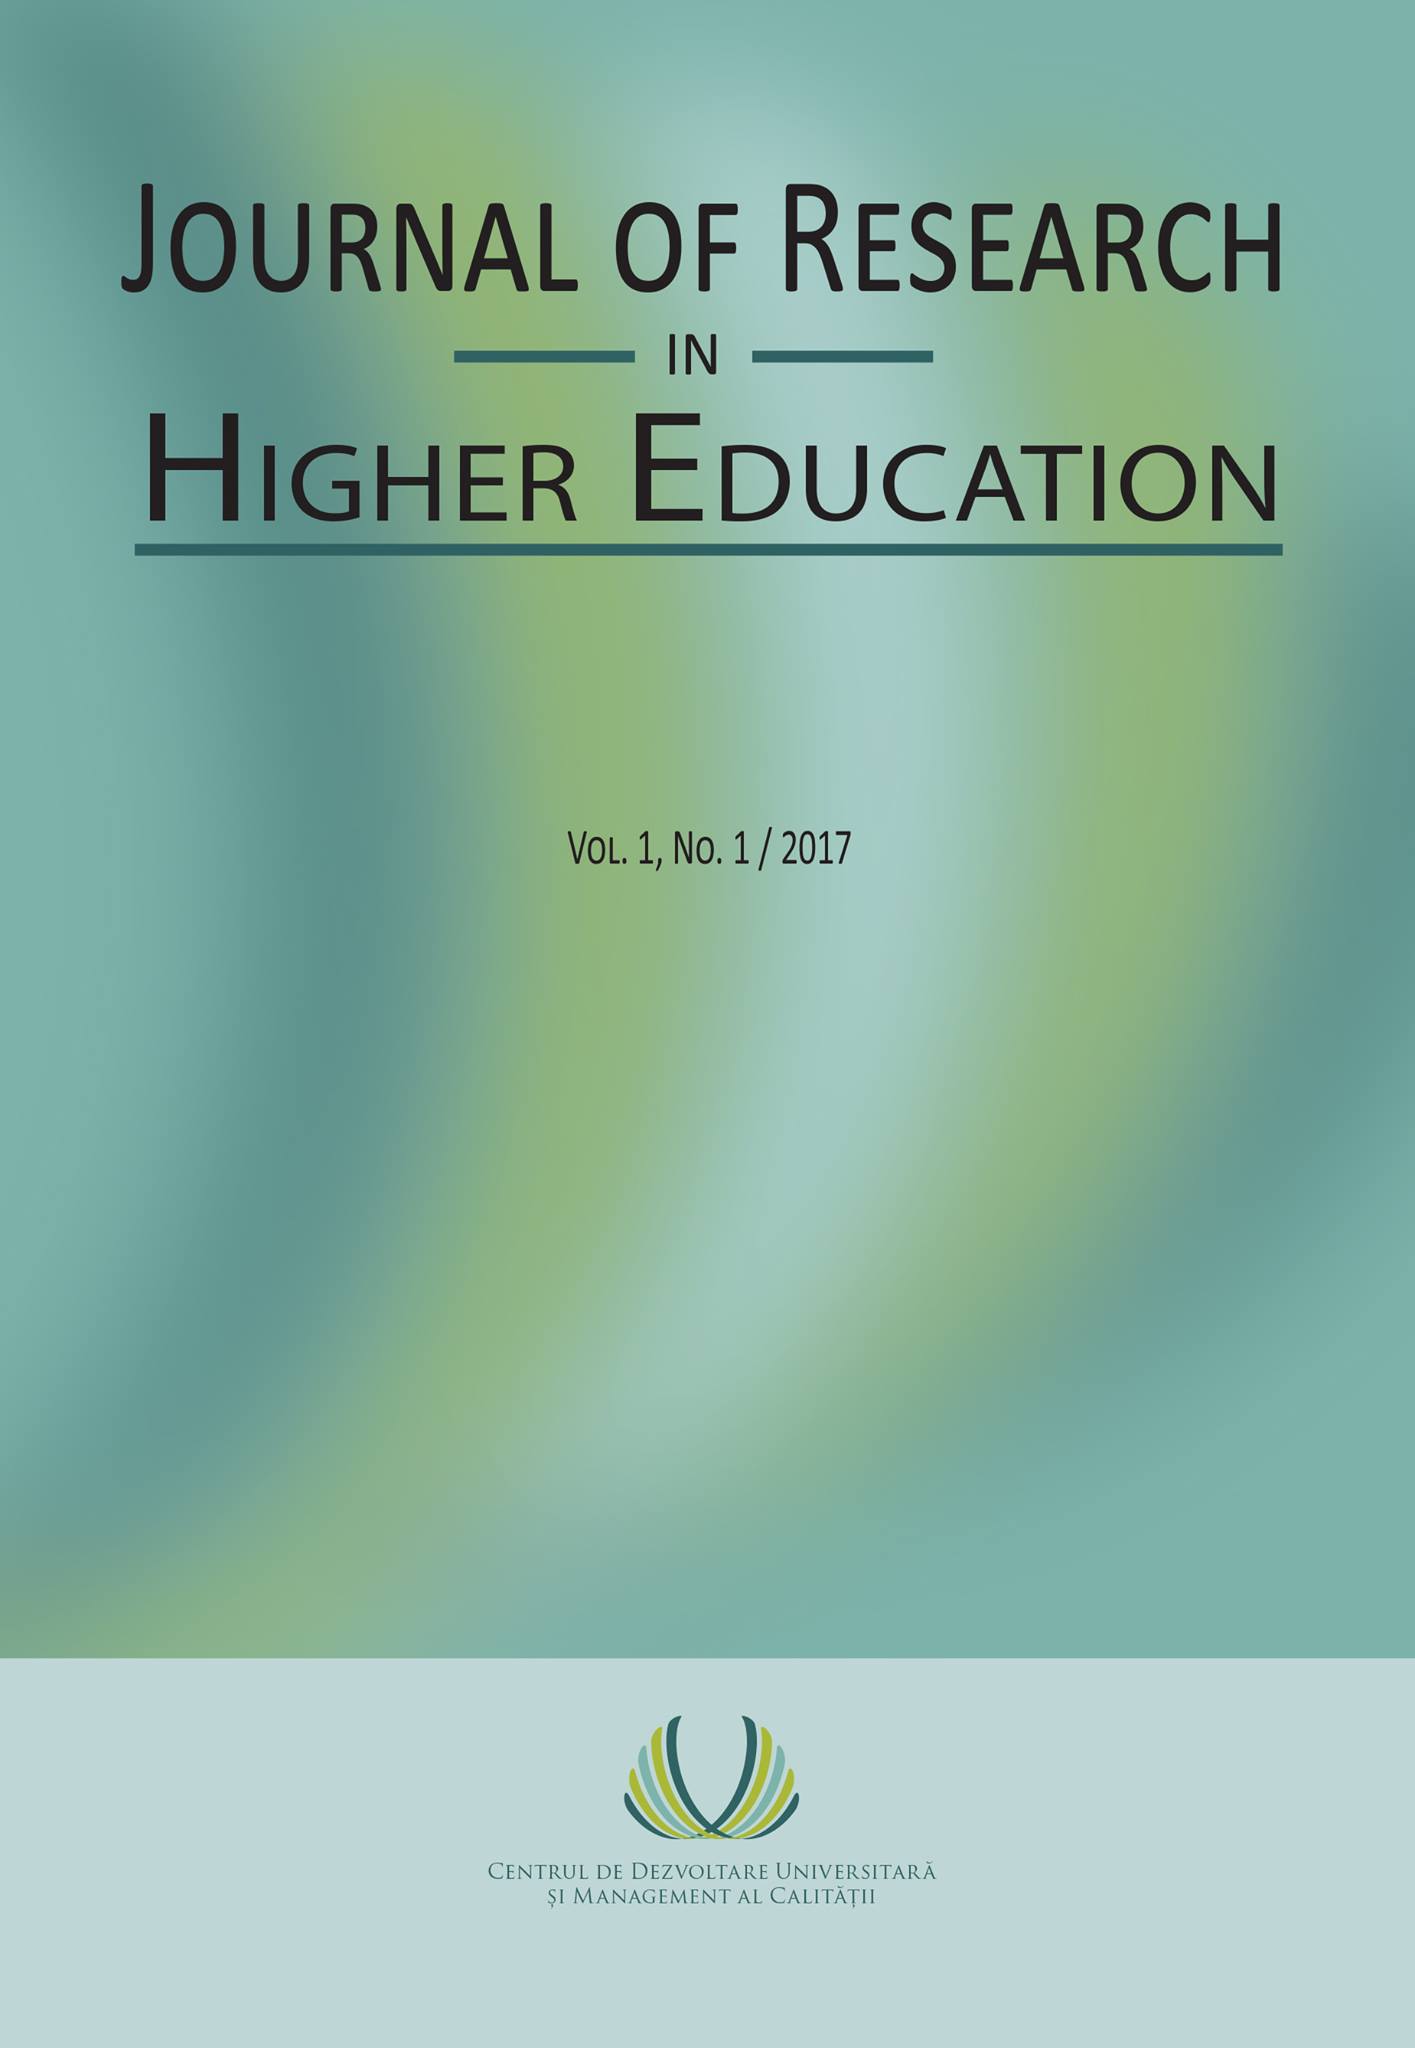 International Participation in Quality Assurance within the European Higher Education Area